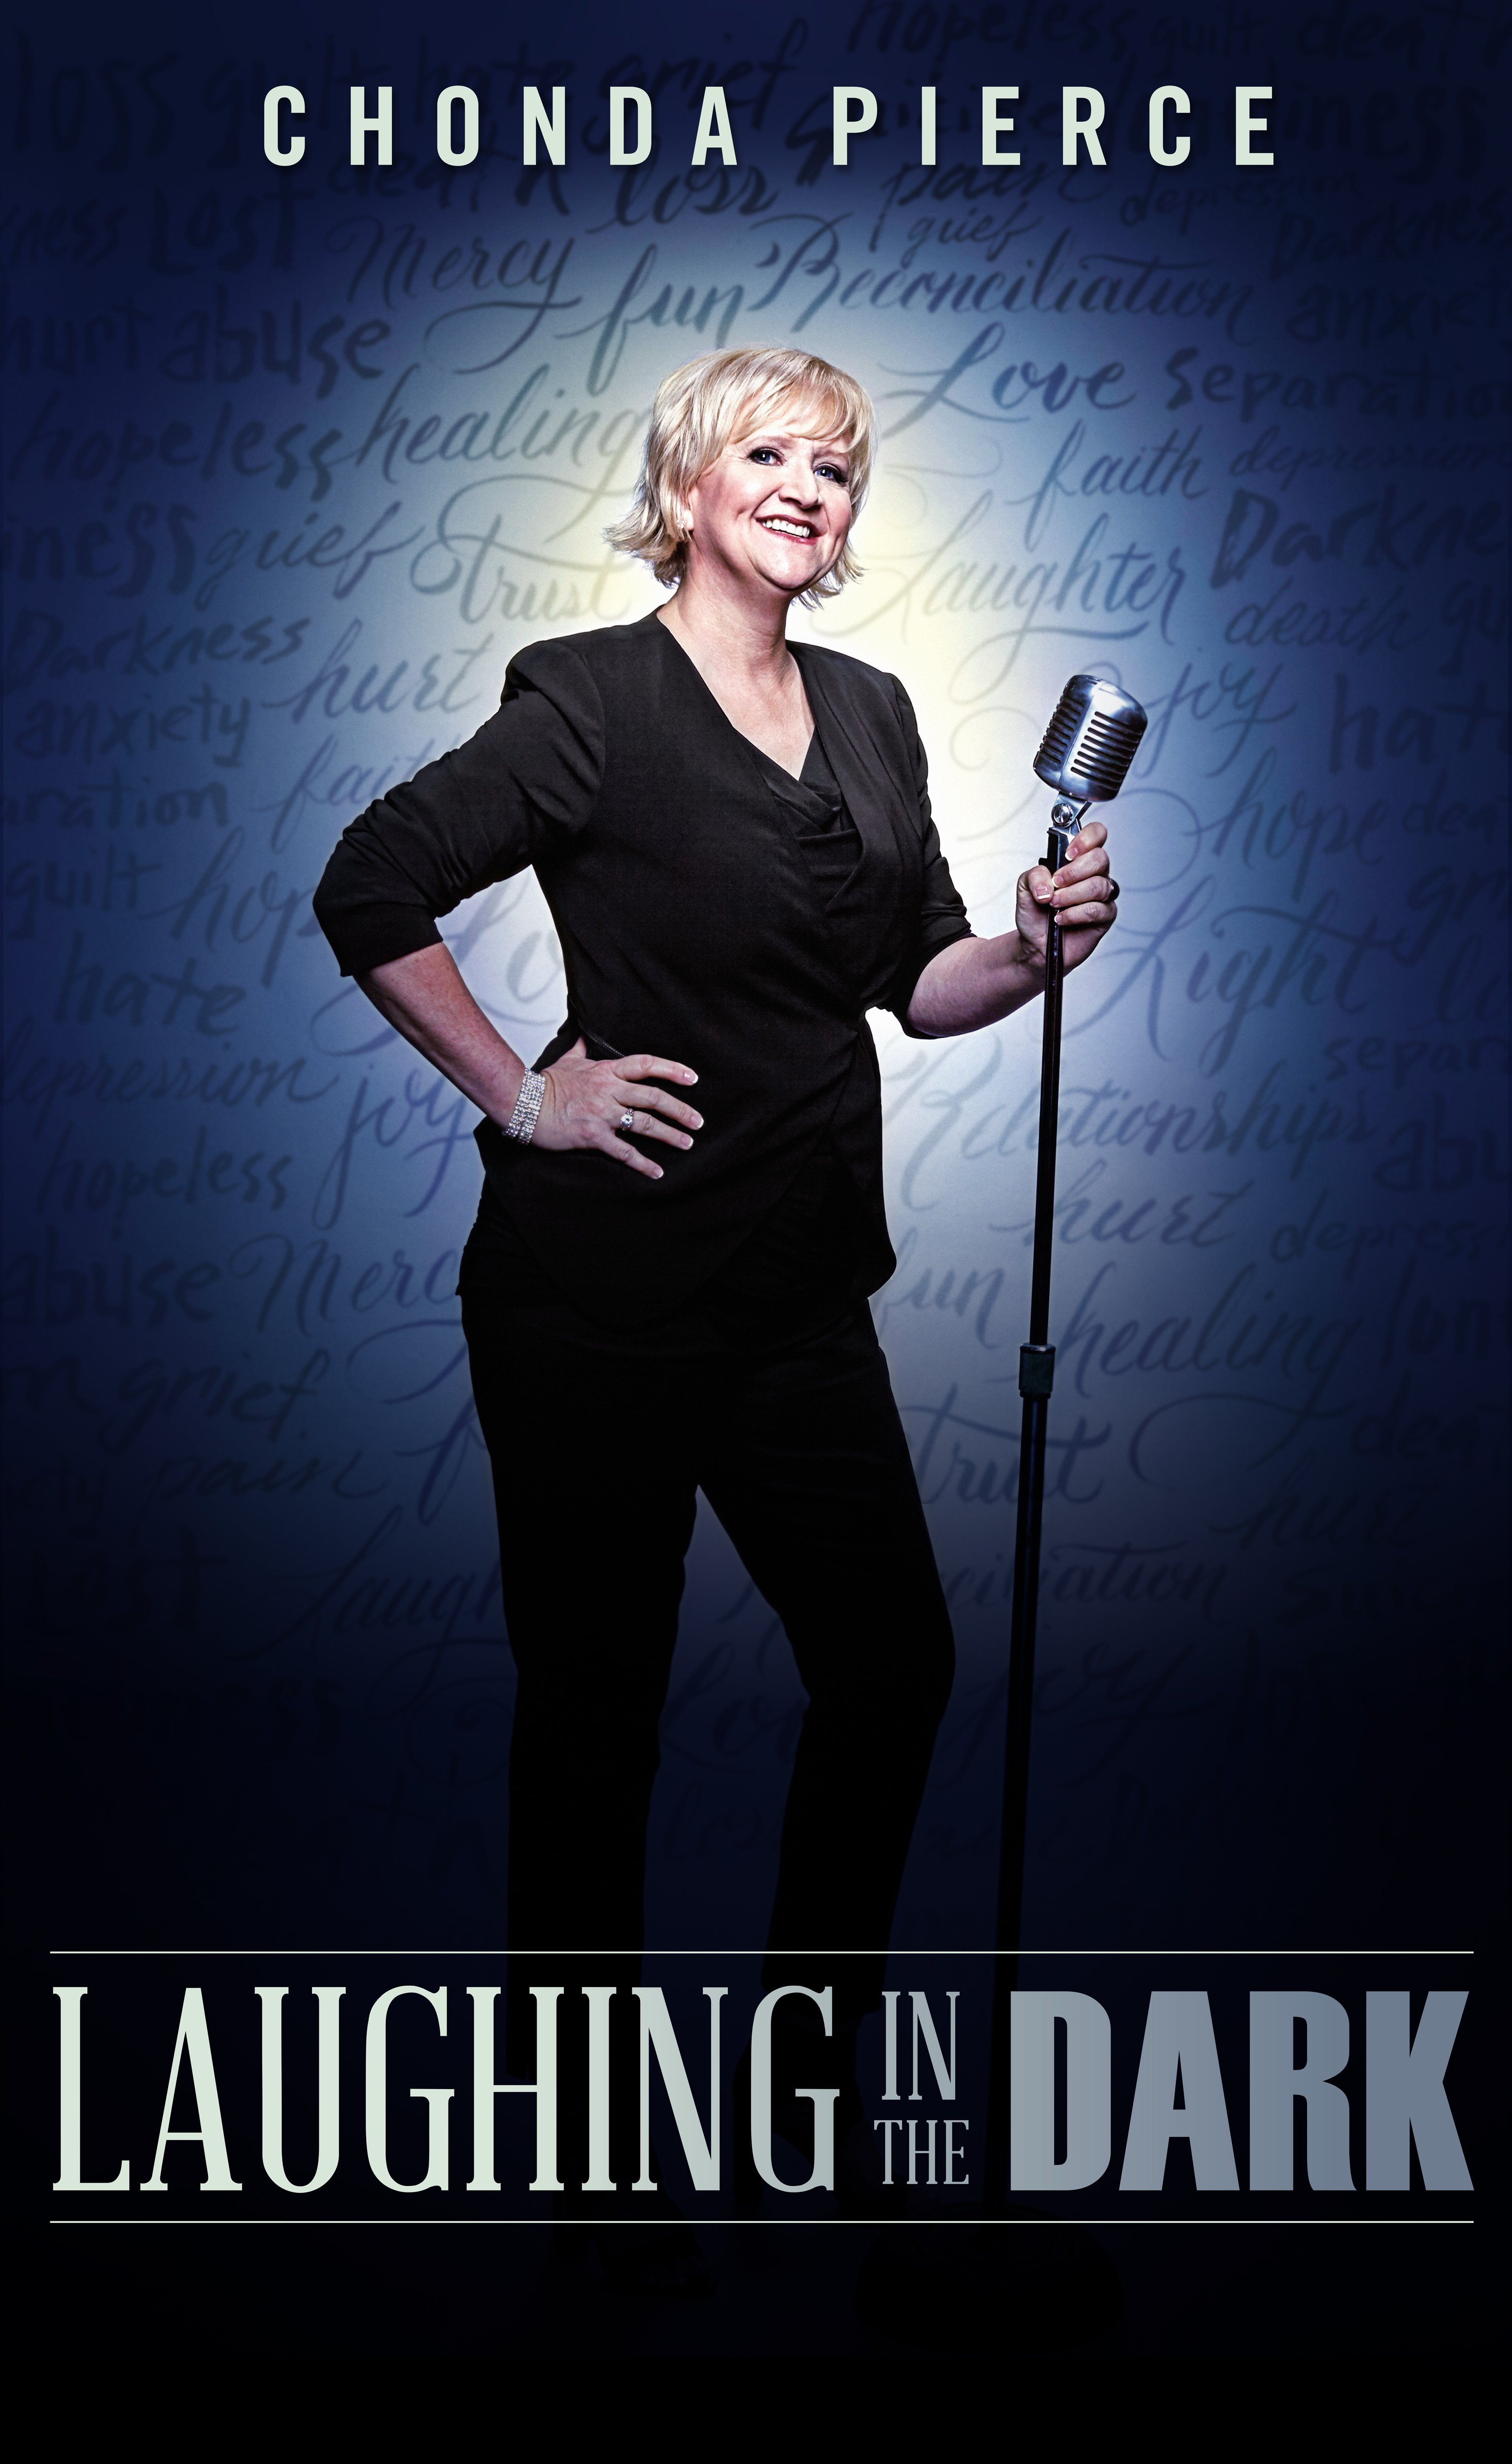 Poster of the movie Chonda Pierce: Laughing in the Dark